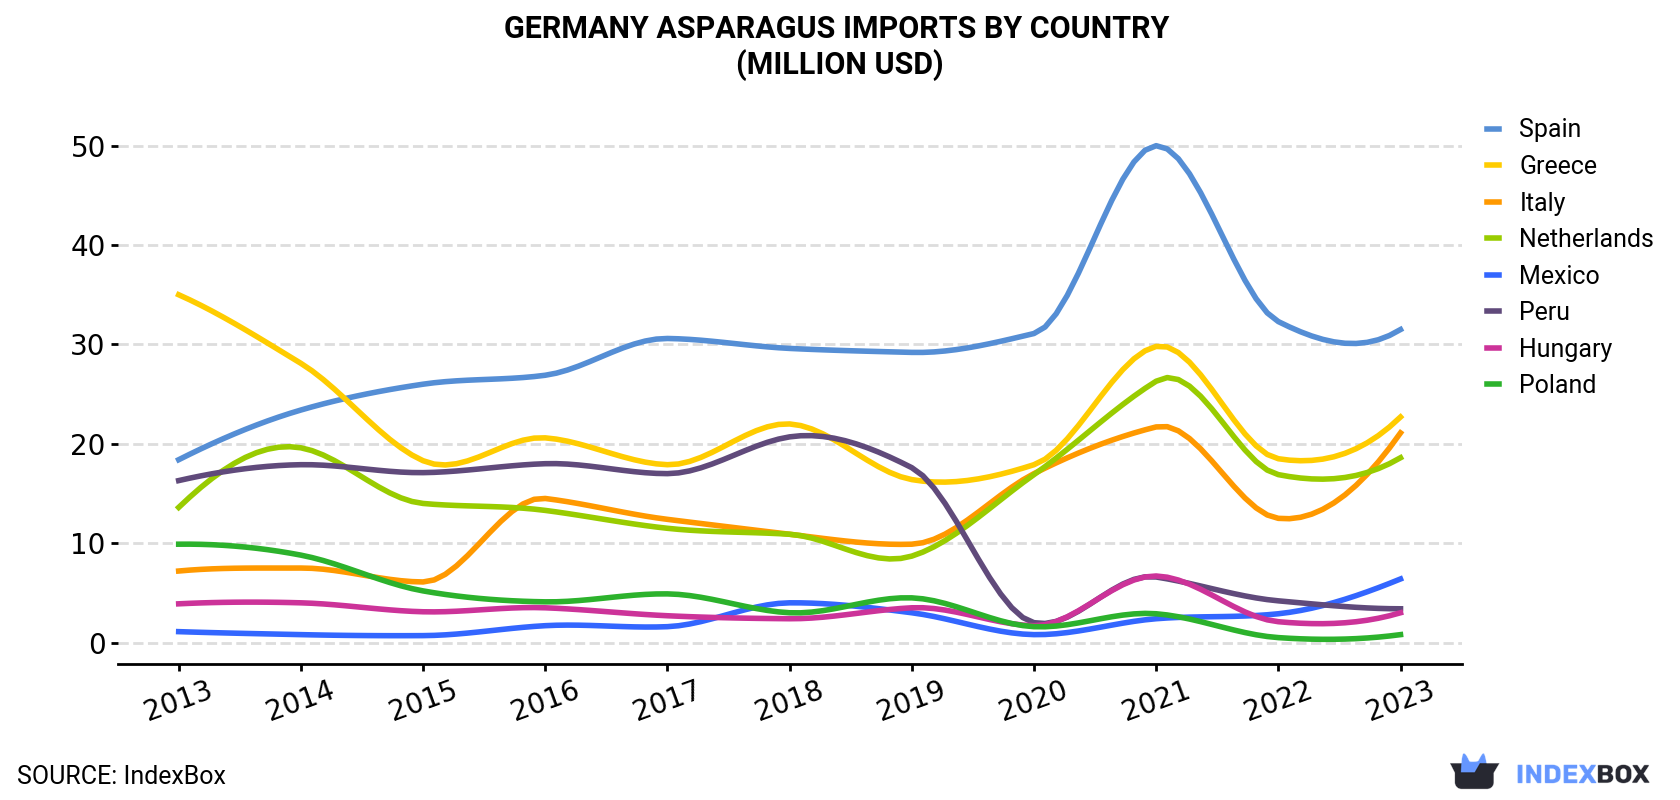 Germany Asparagus Imports By Country (Million USD)